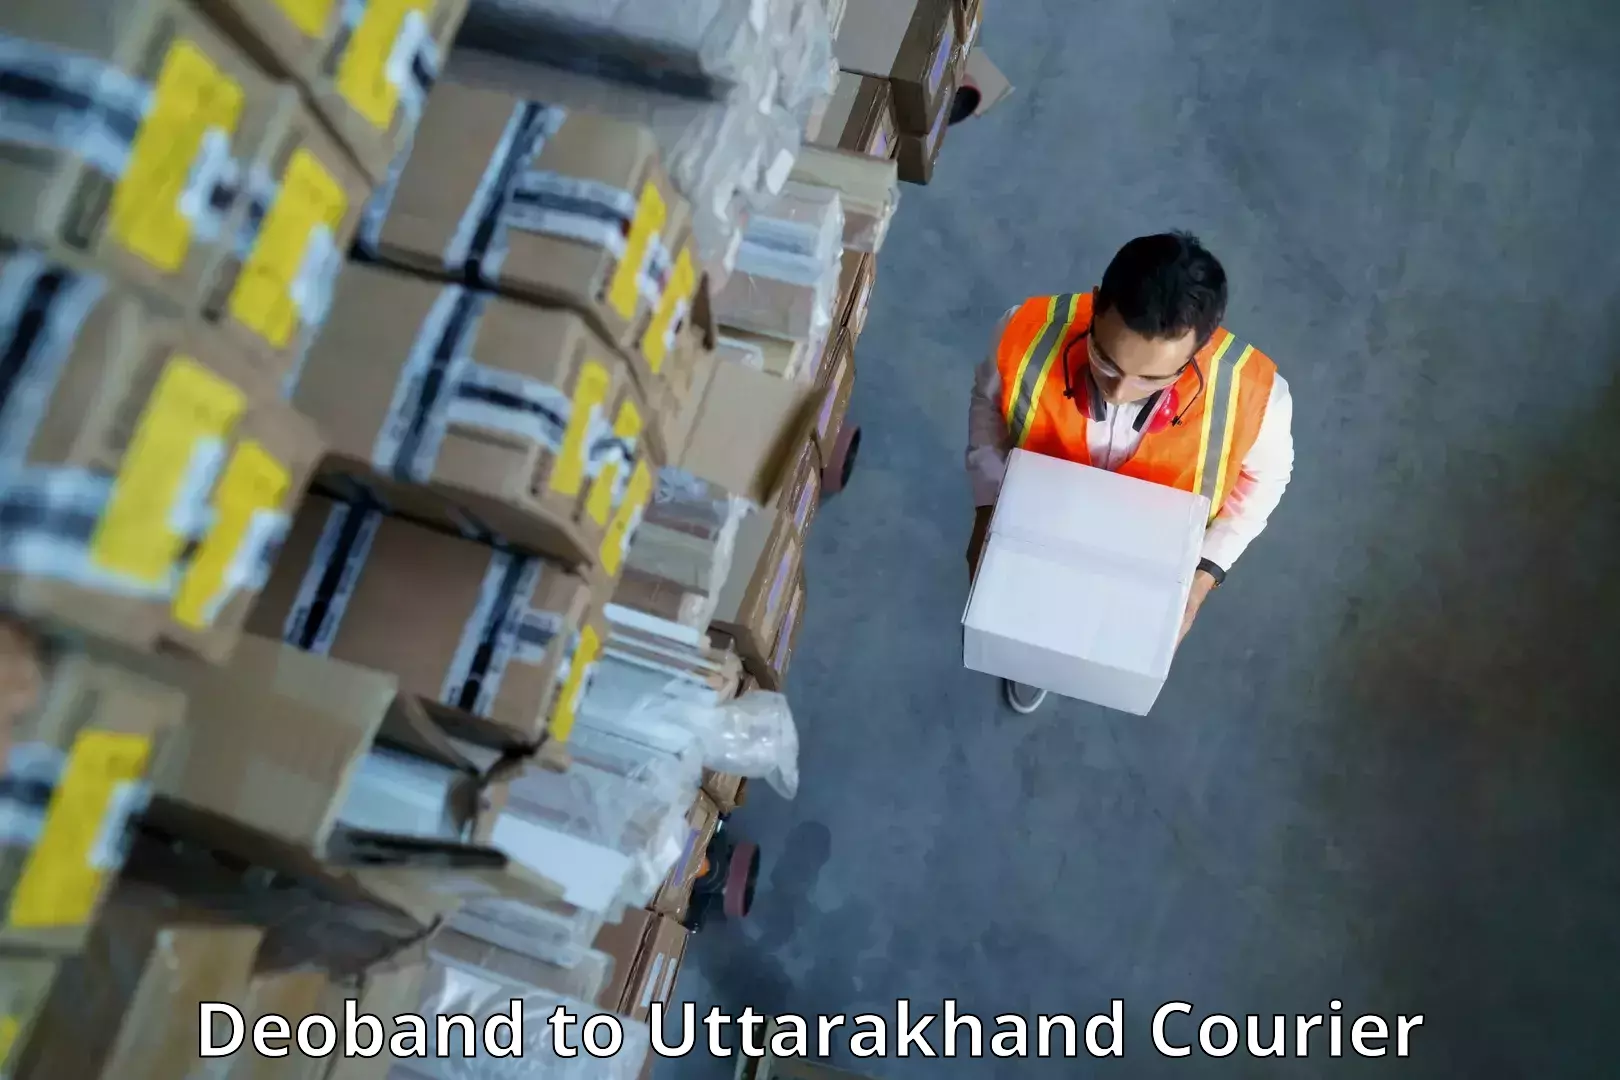 On-call courier service Deoband to Bageshwar